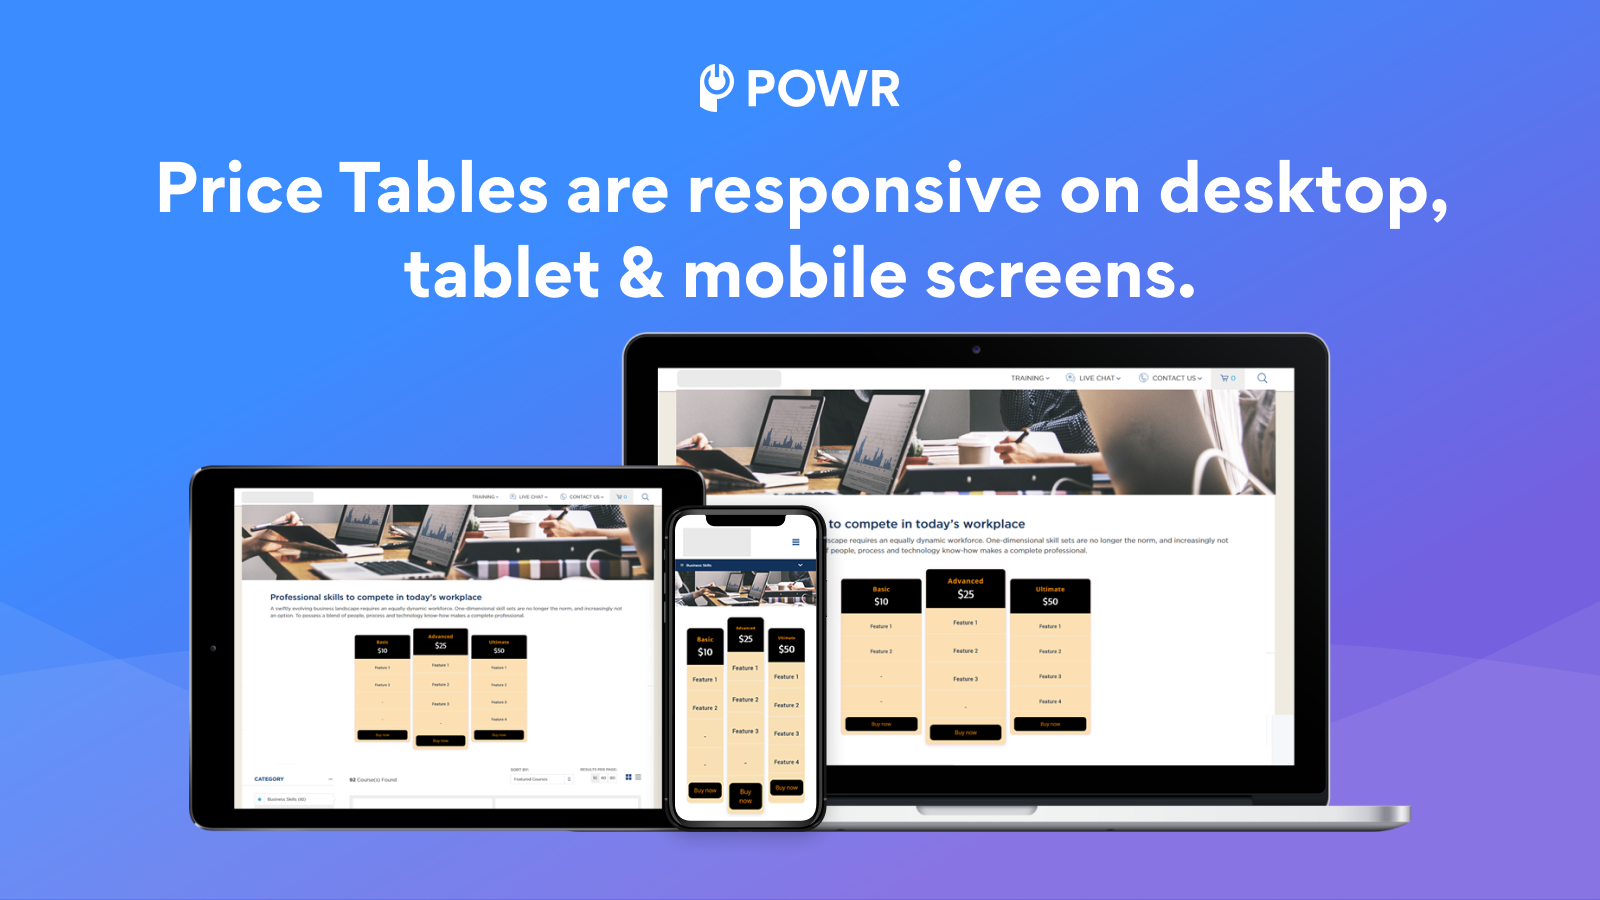 Price Table is responsive on desktop, tablet & mobile.